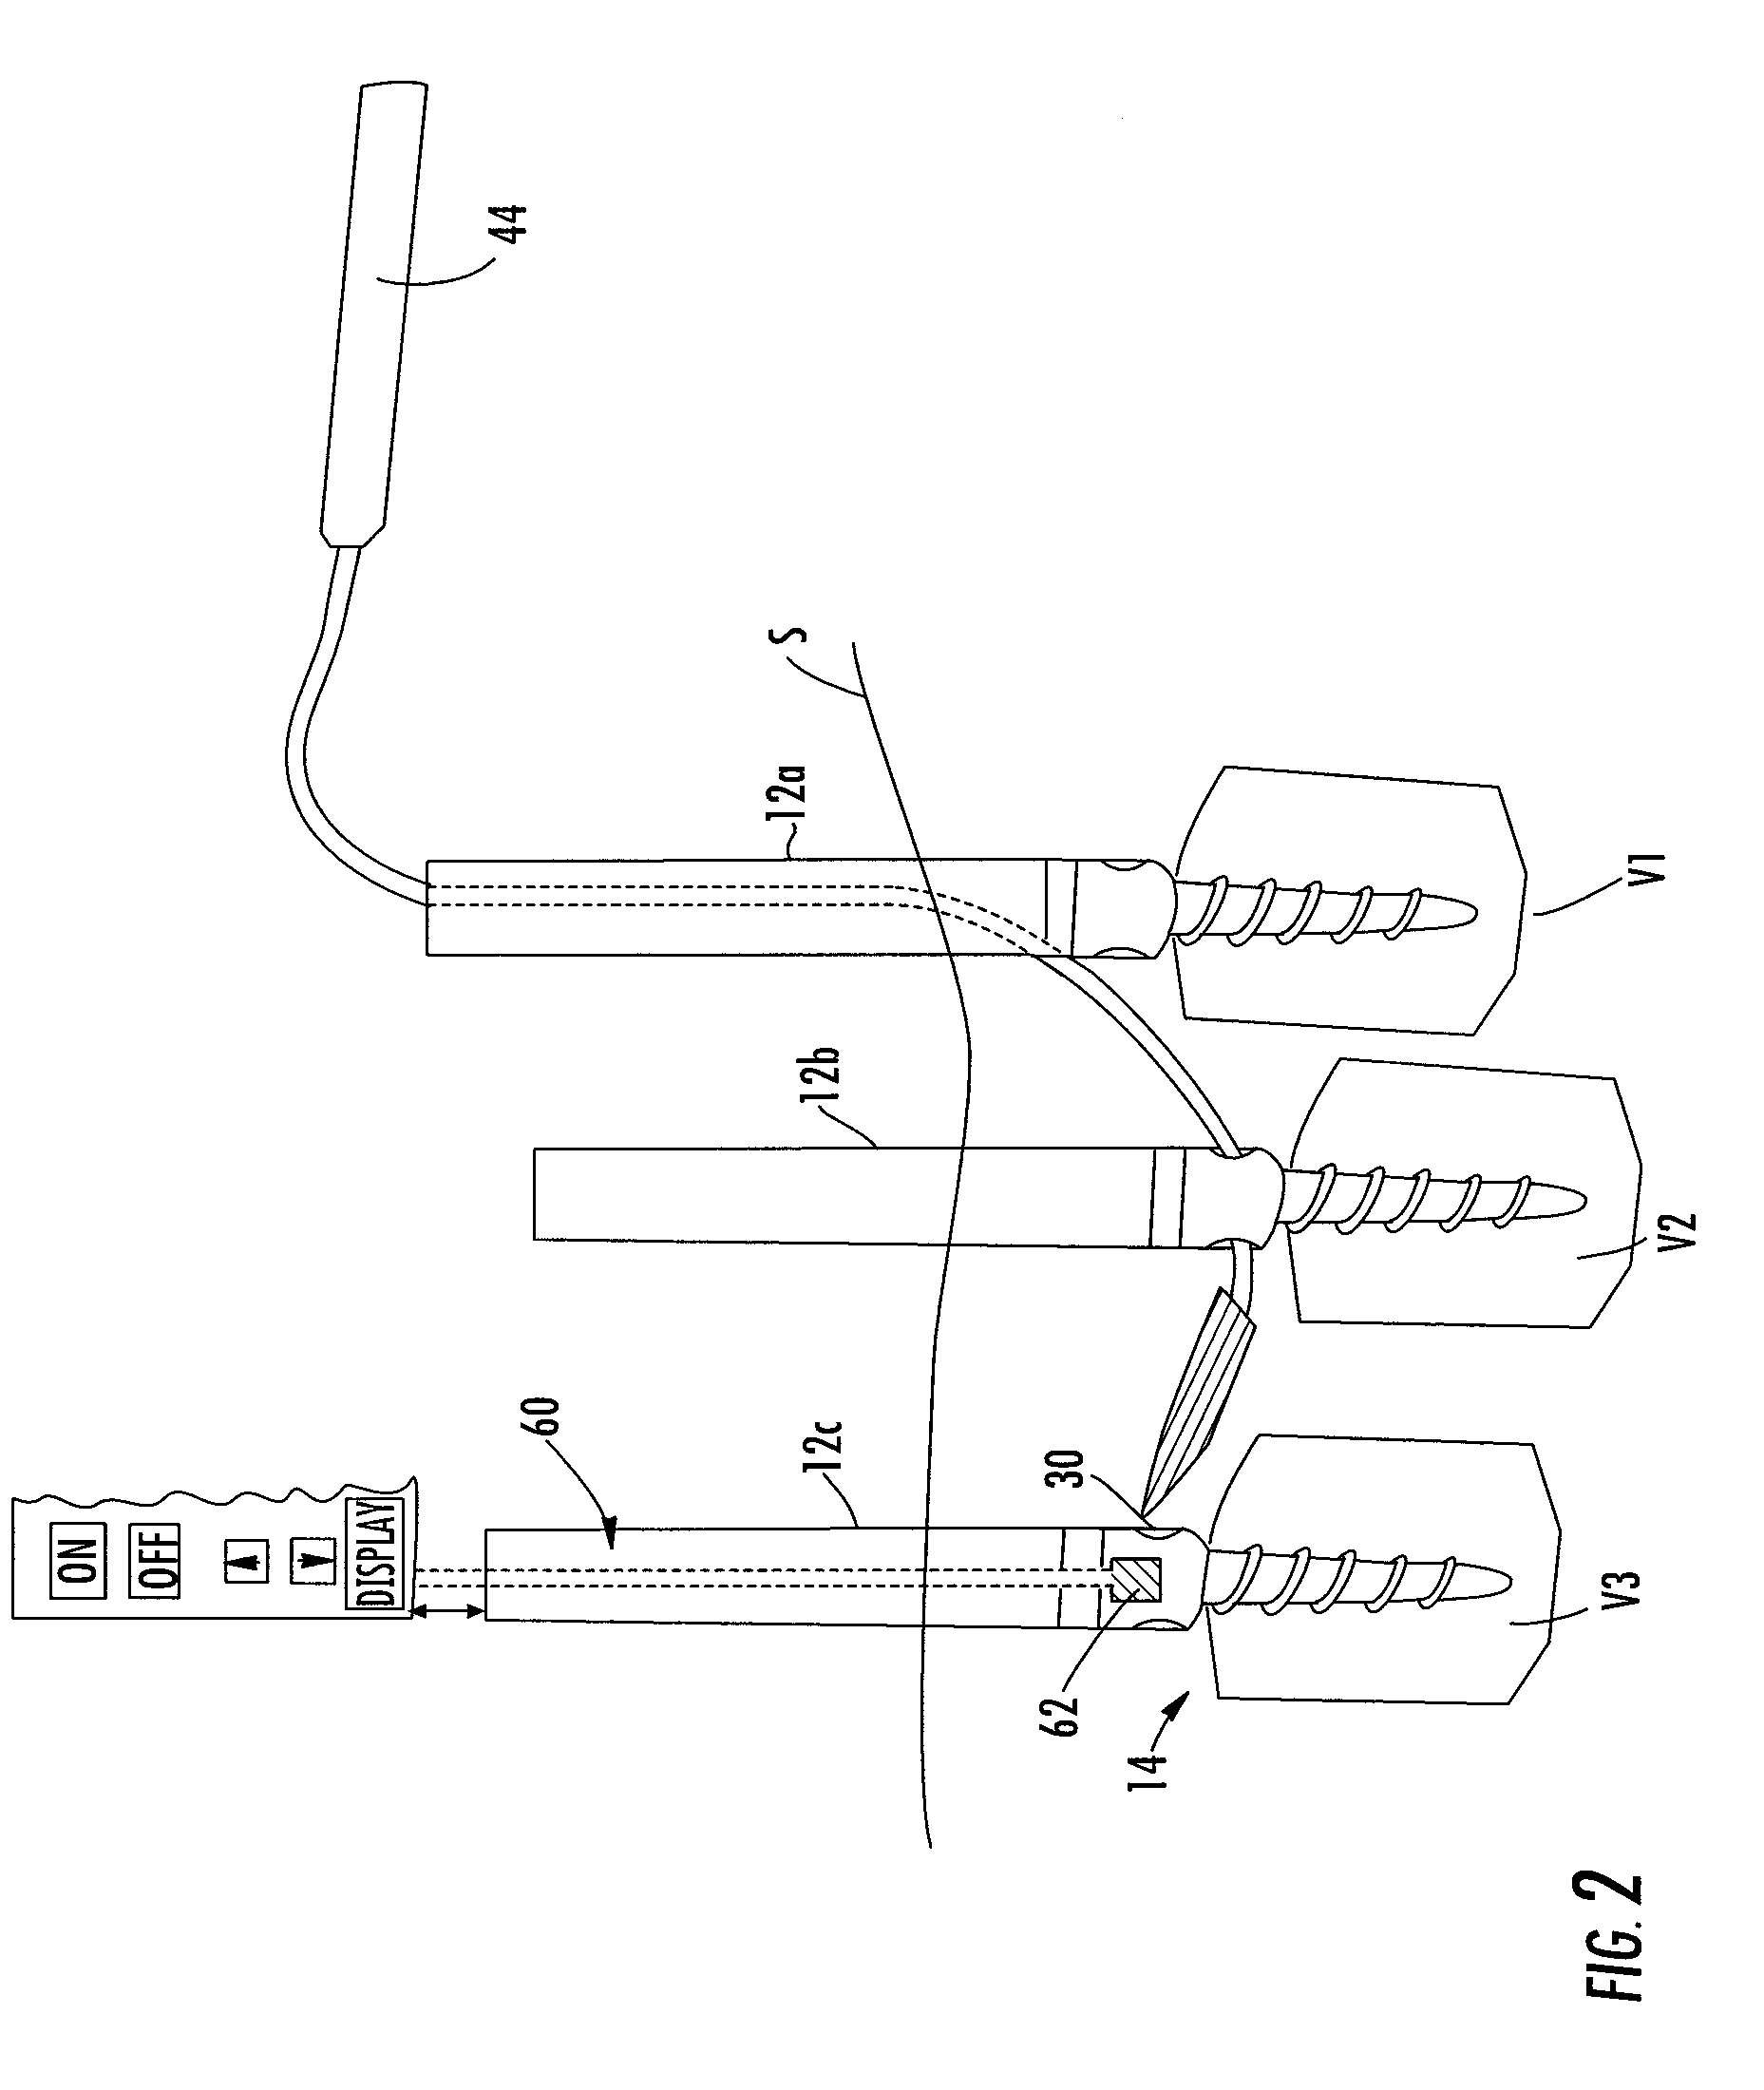 Magnetic Targeting System And Method Of Using The Same